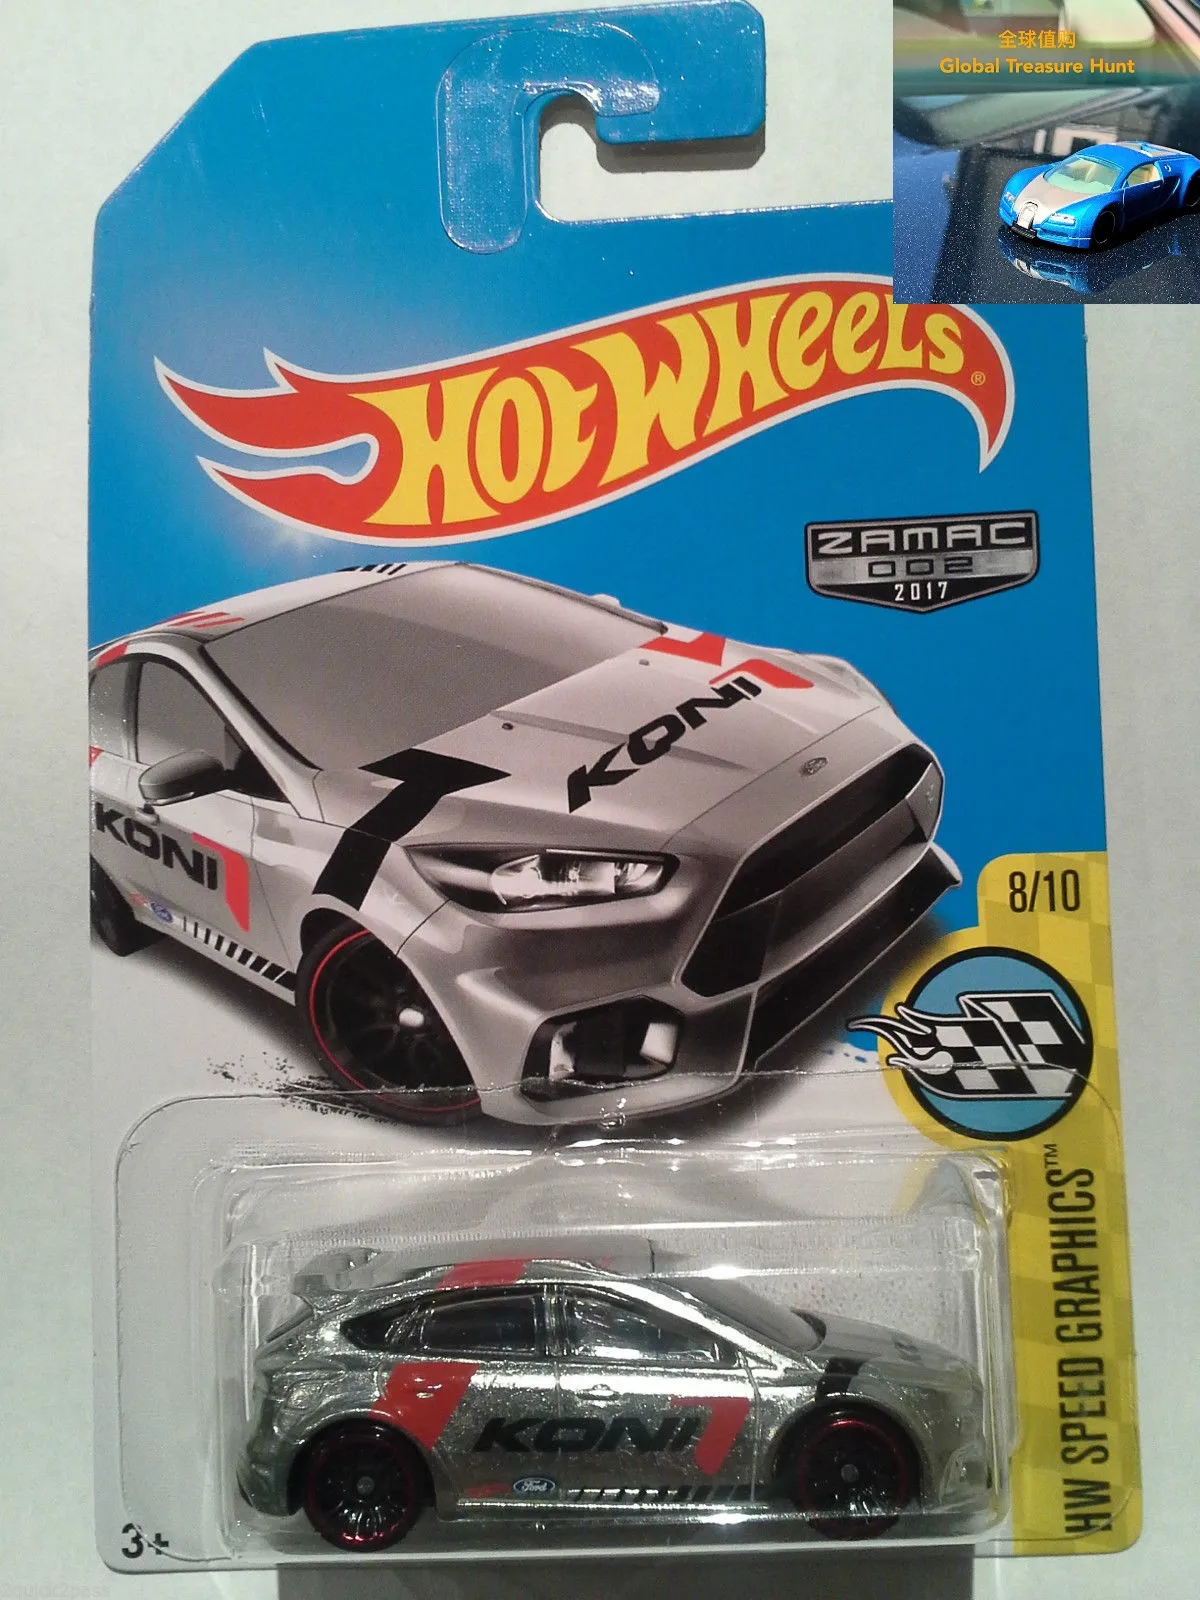 

Hoot Wheels 1/64 2017 Focus RS Alloy car model toy rare collection